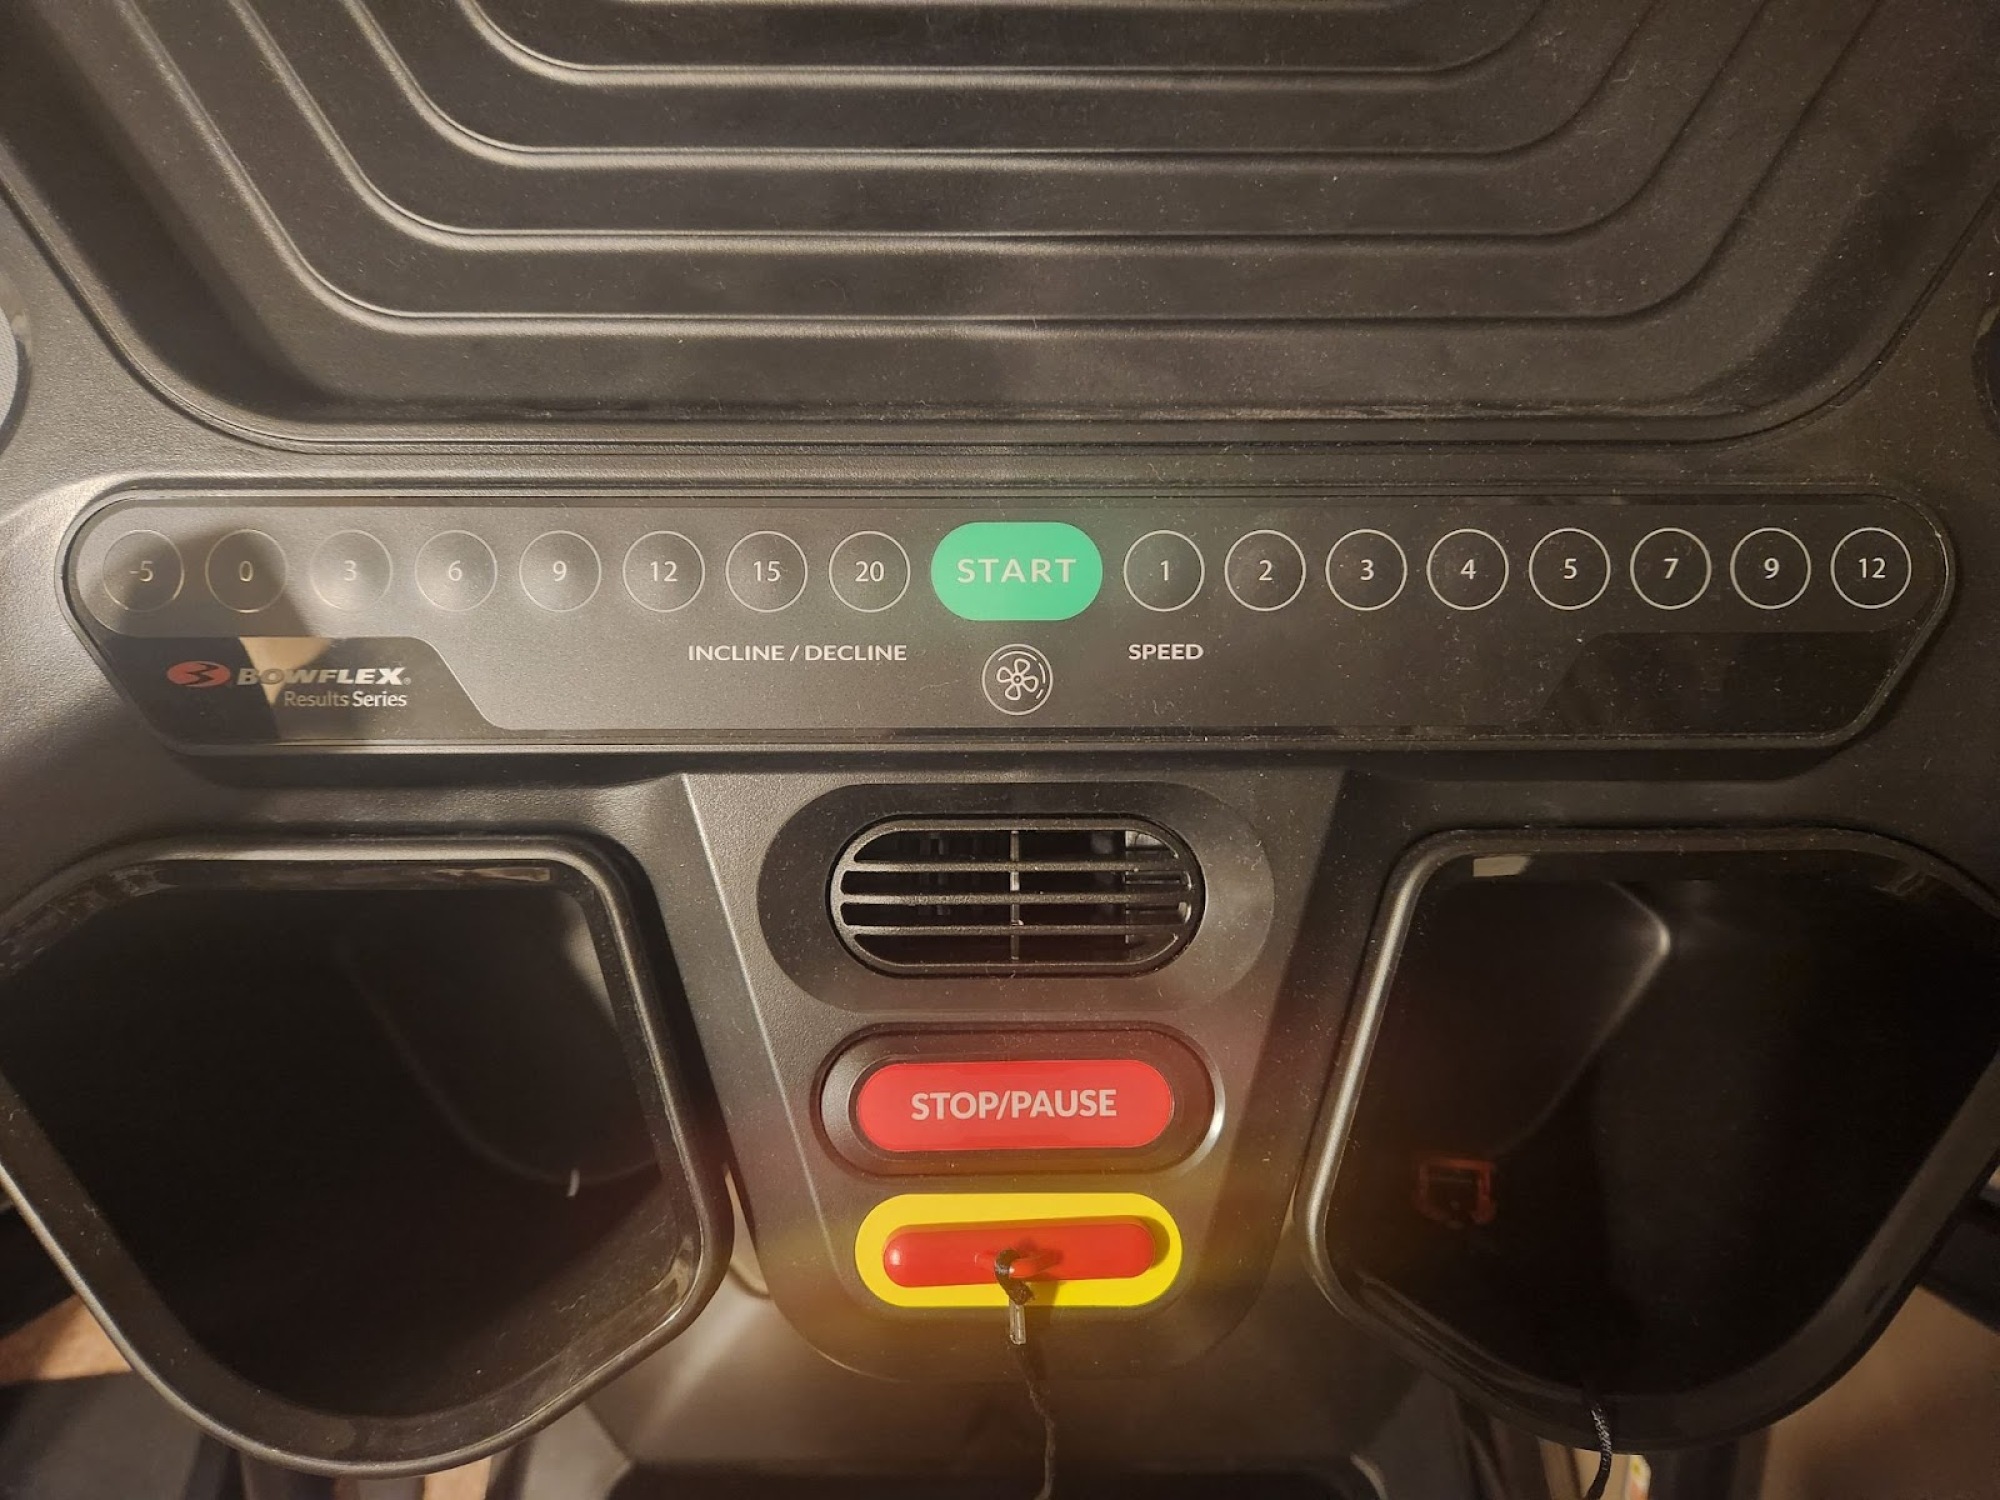 treadmill control panel with speed and incline buttons